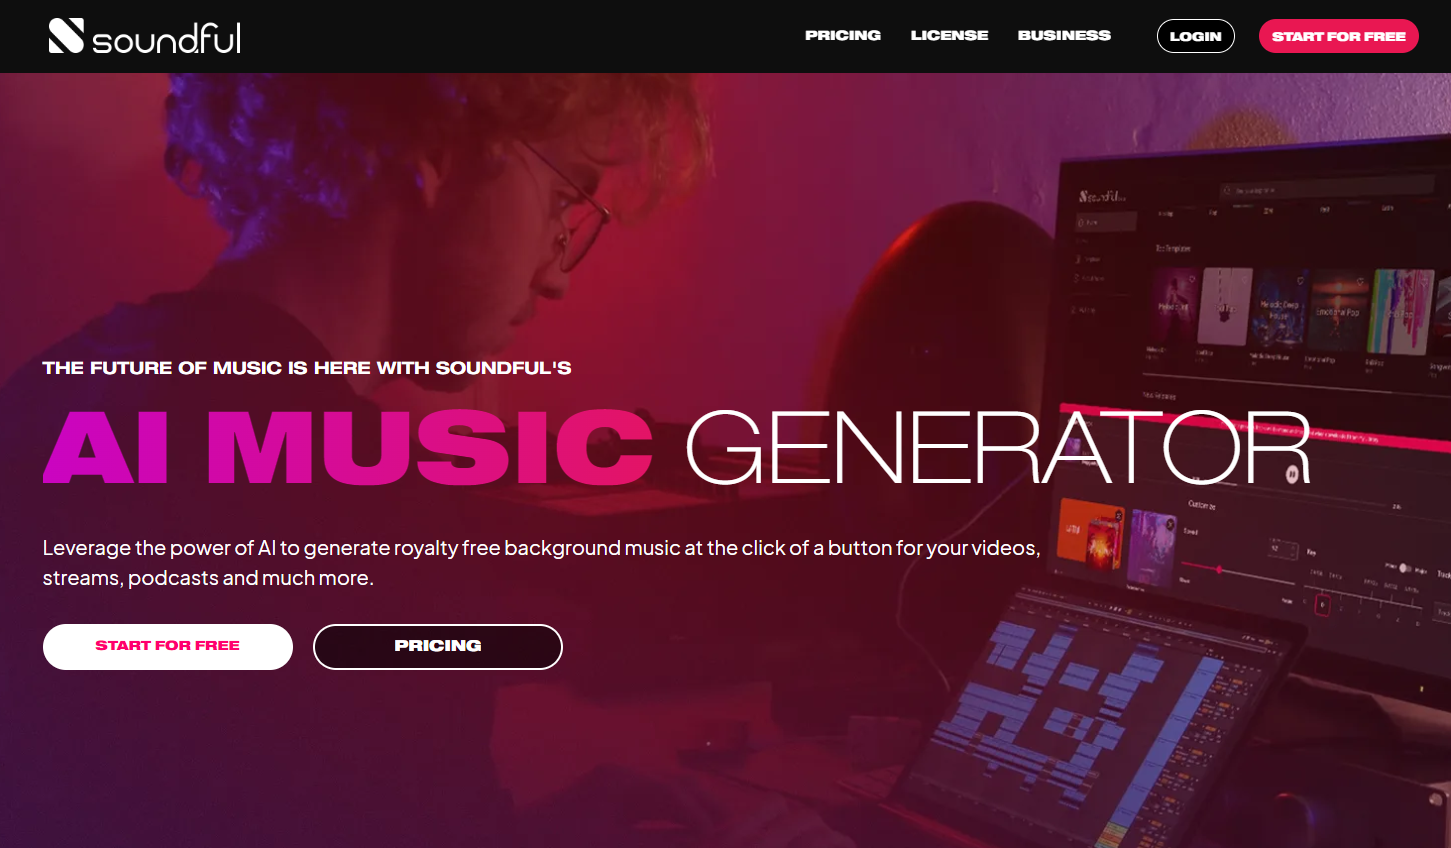 The homepage for the Soundful music generator.